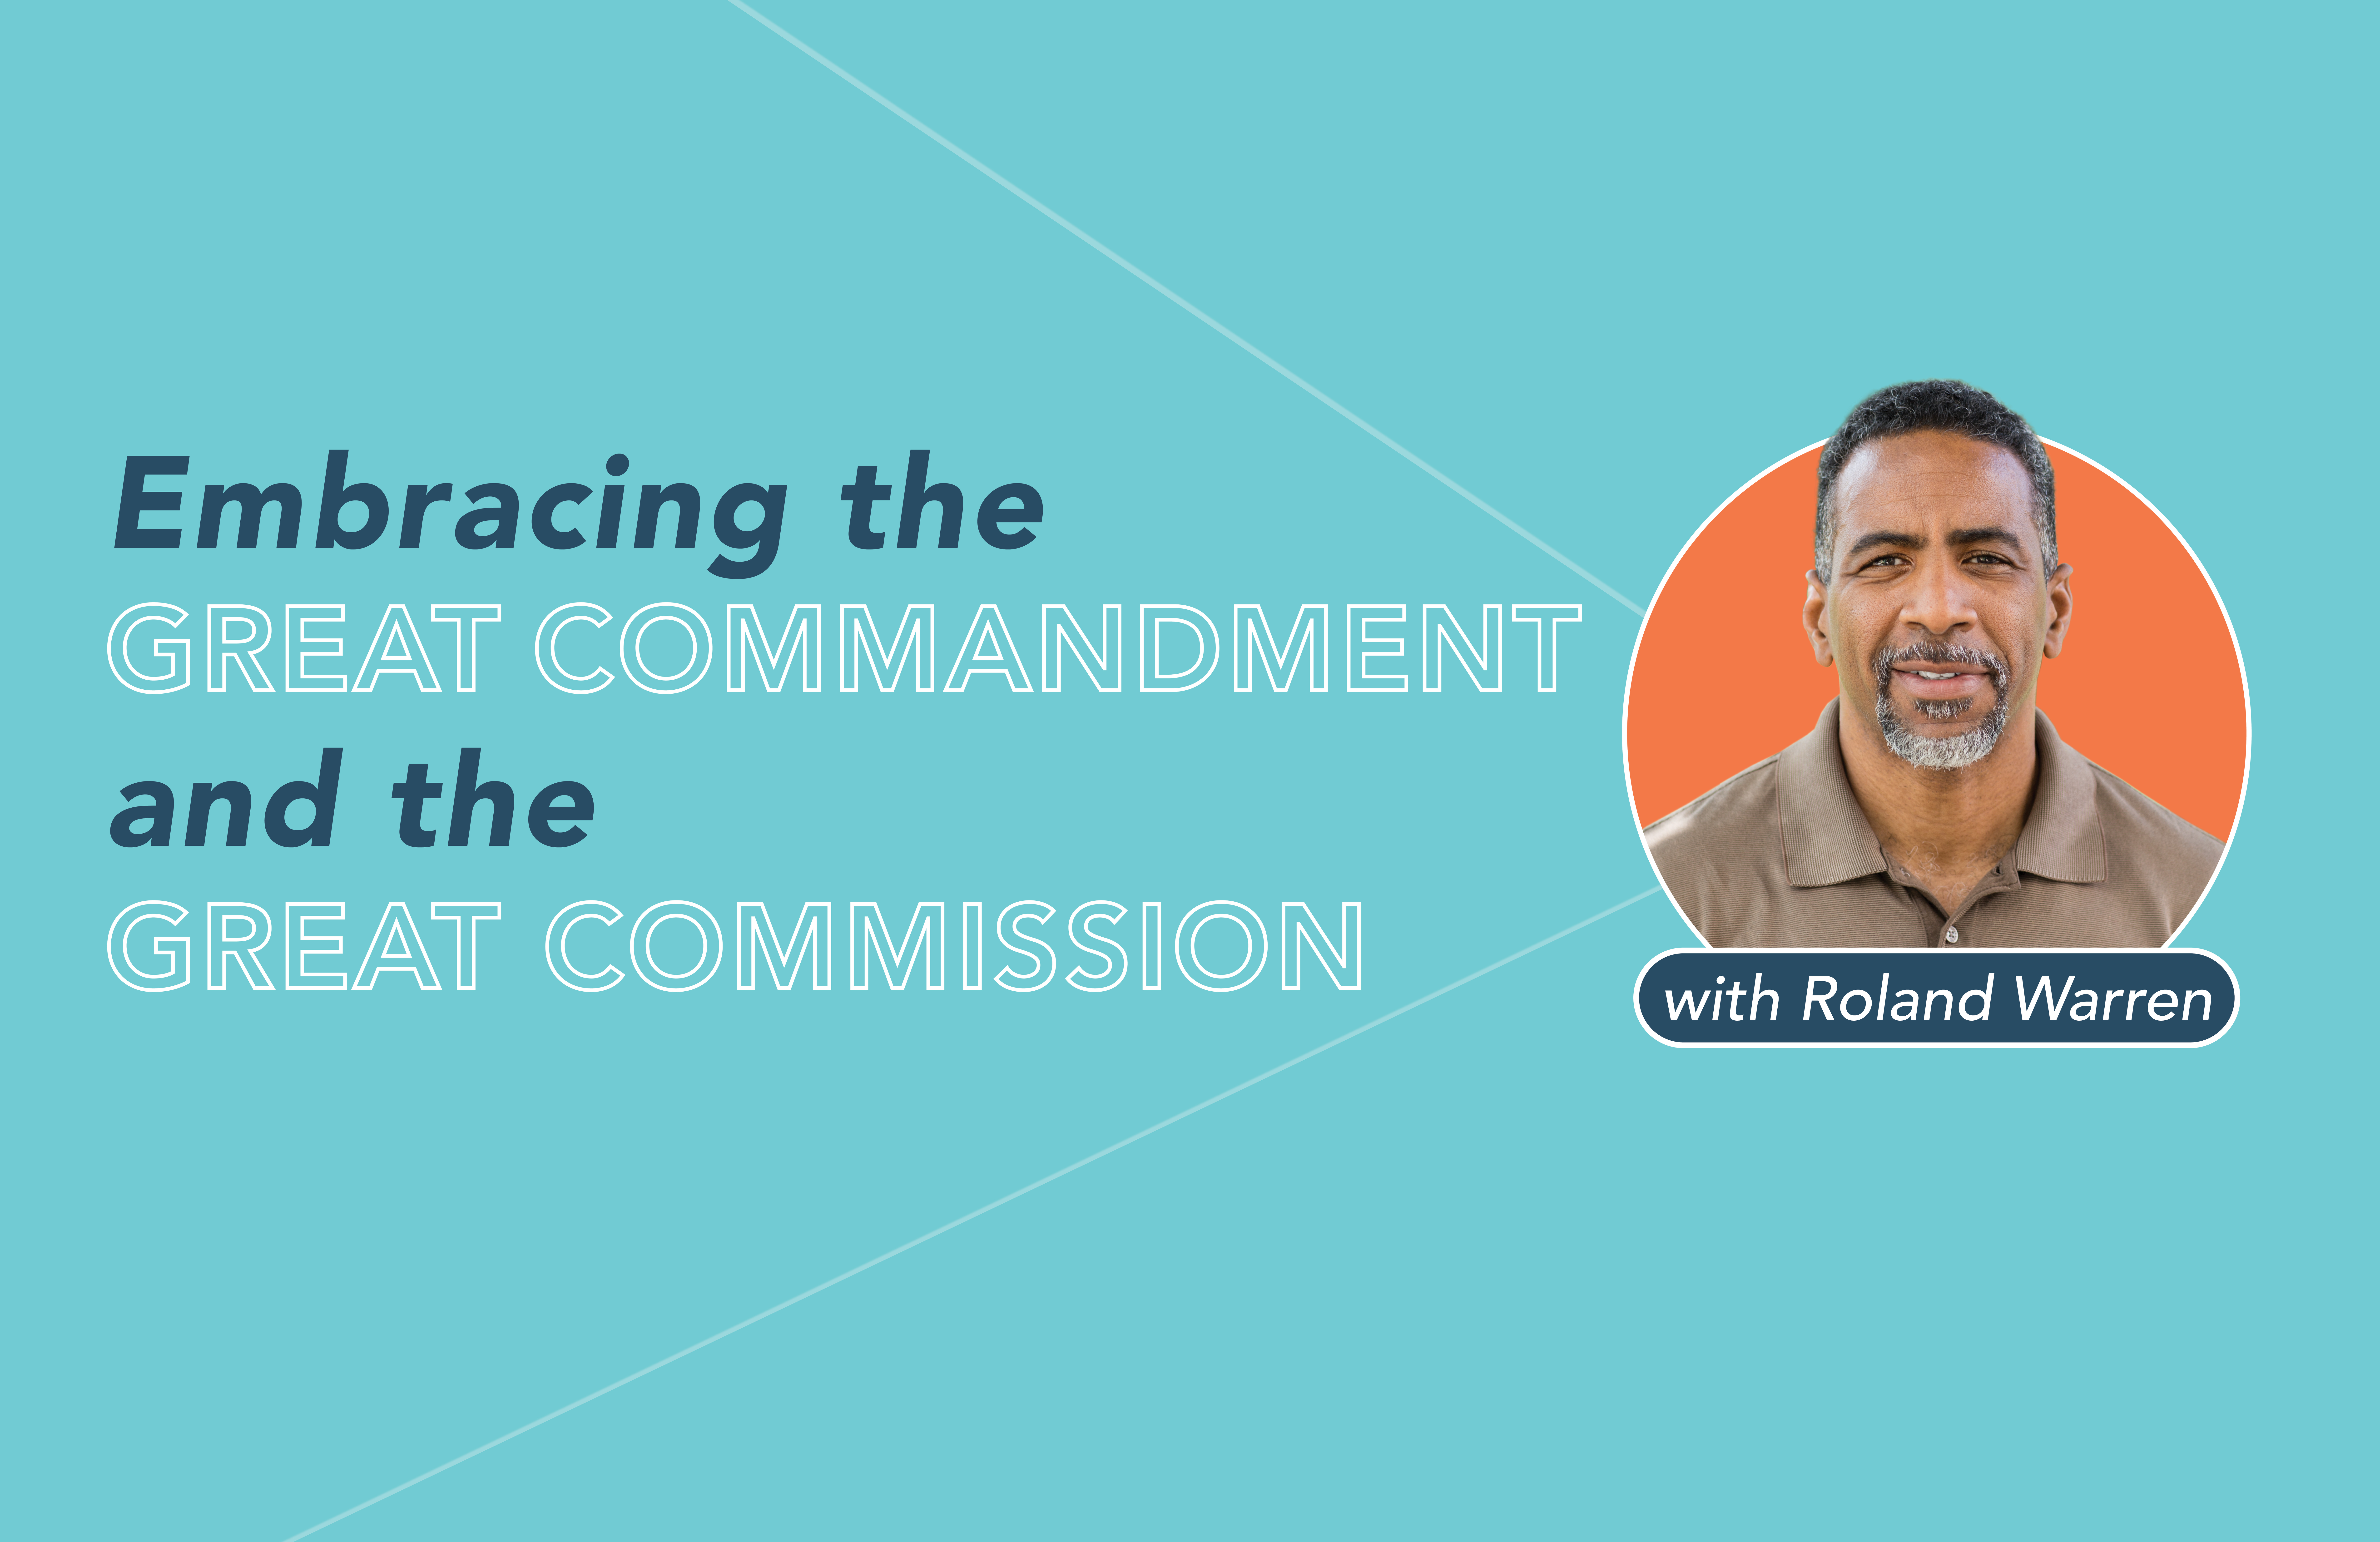 Embracing the Great Commandment and the Great Commission for Pro Abundant Life Ministry [Video]